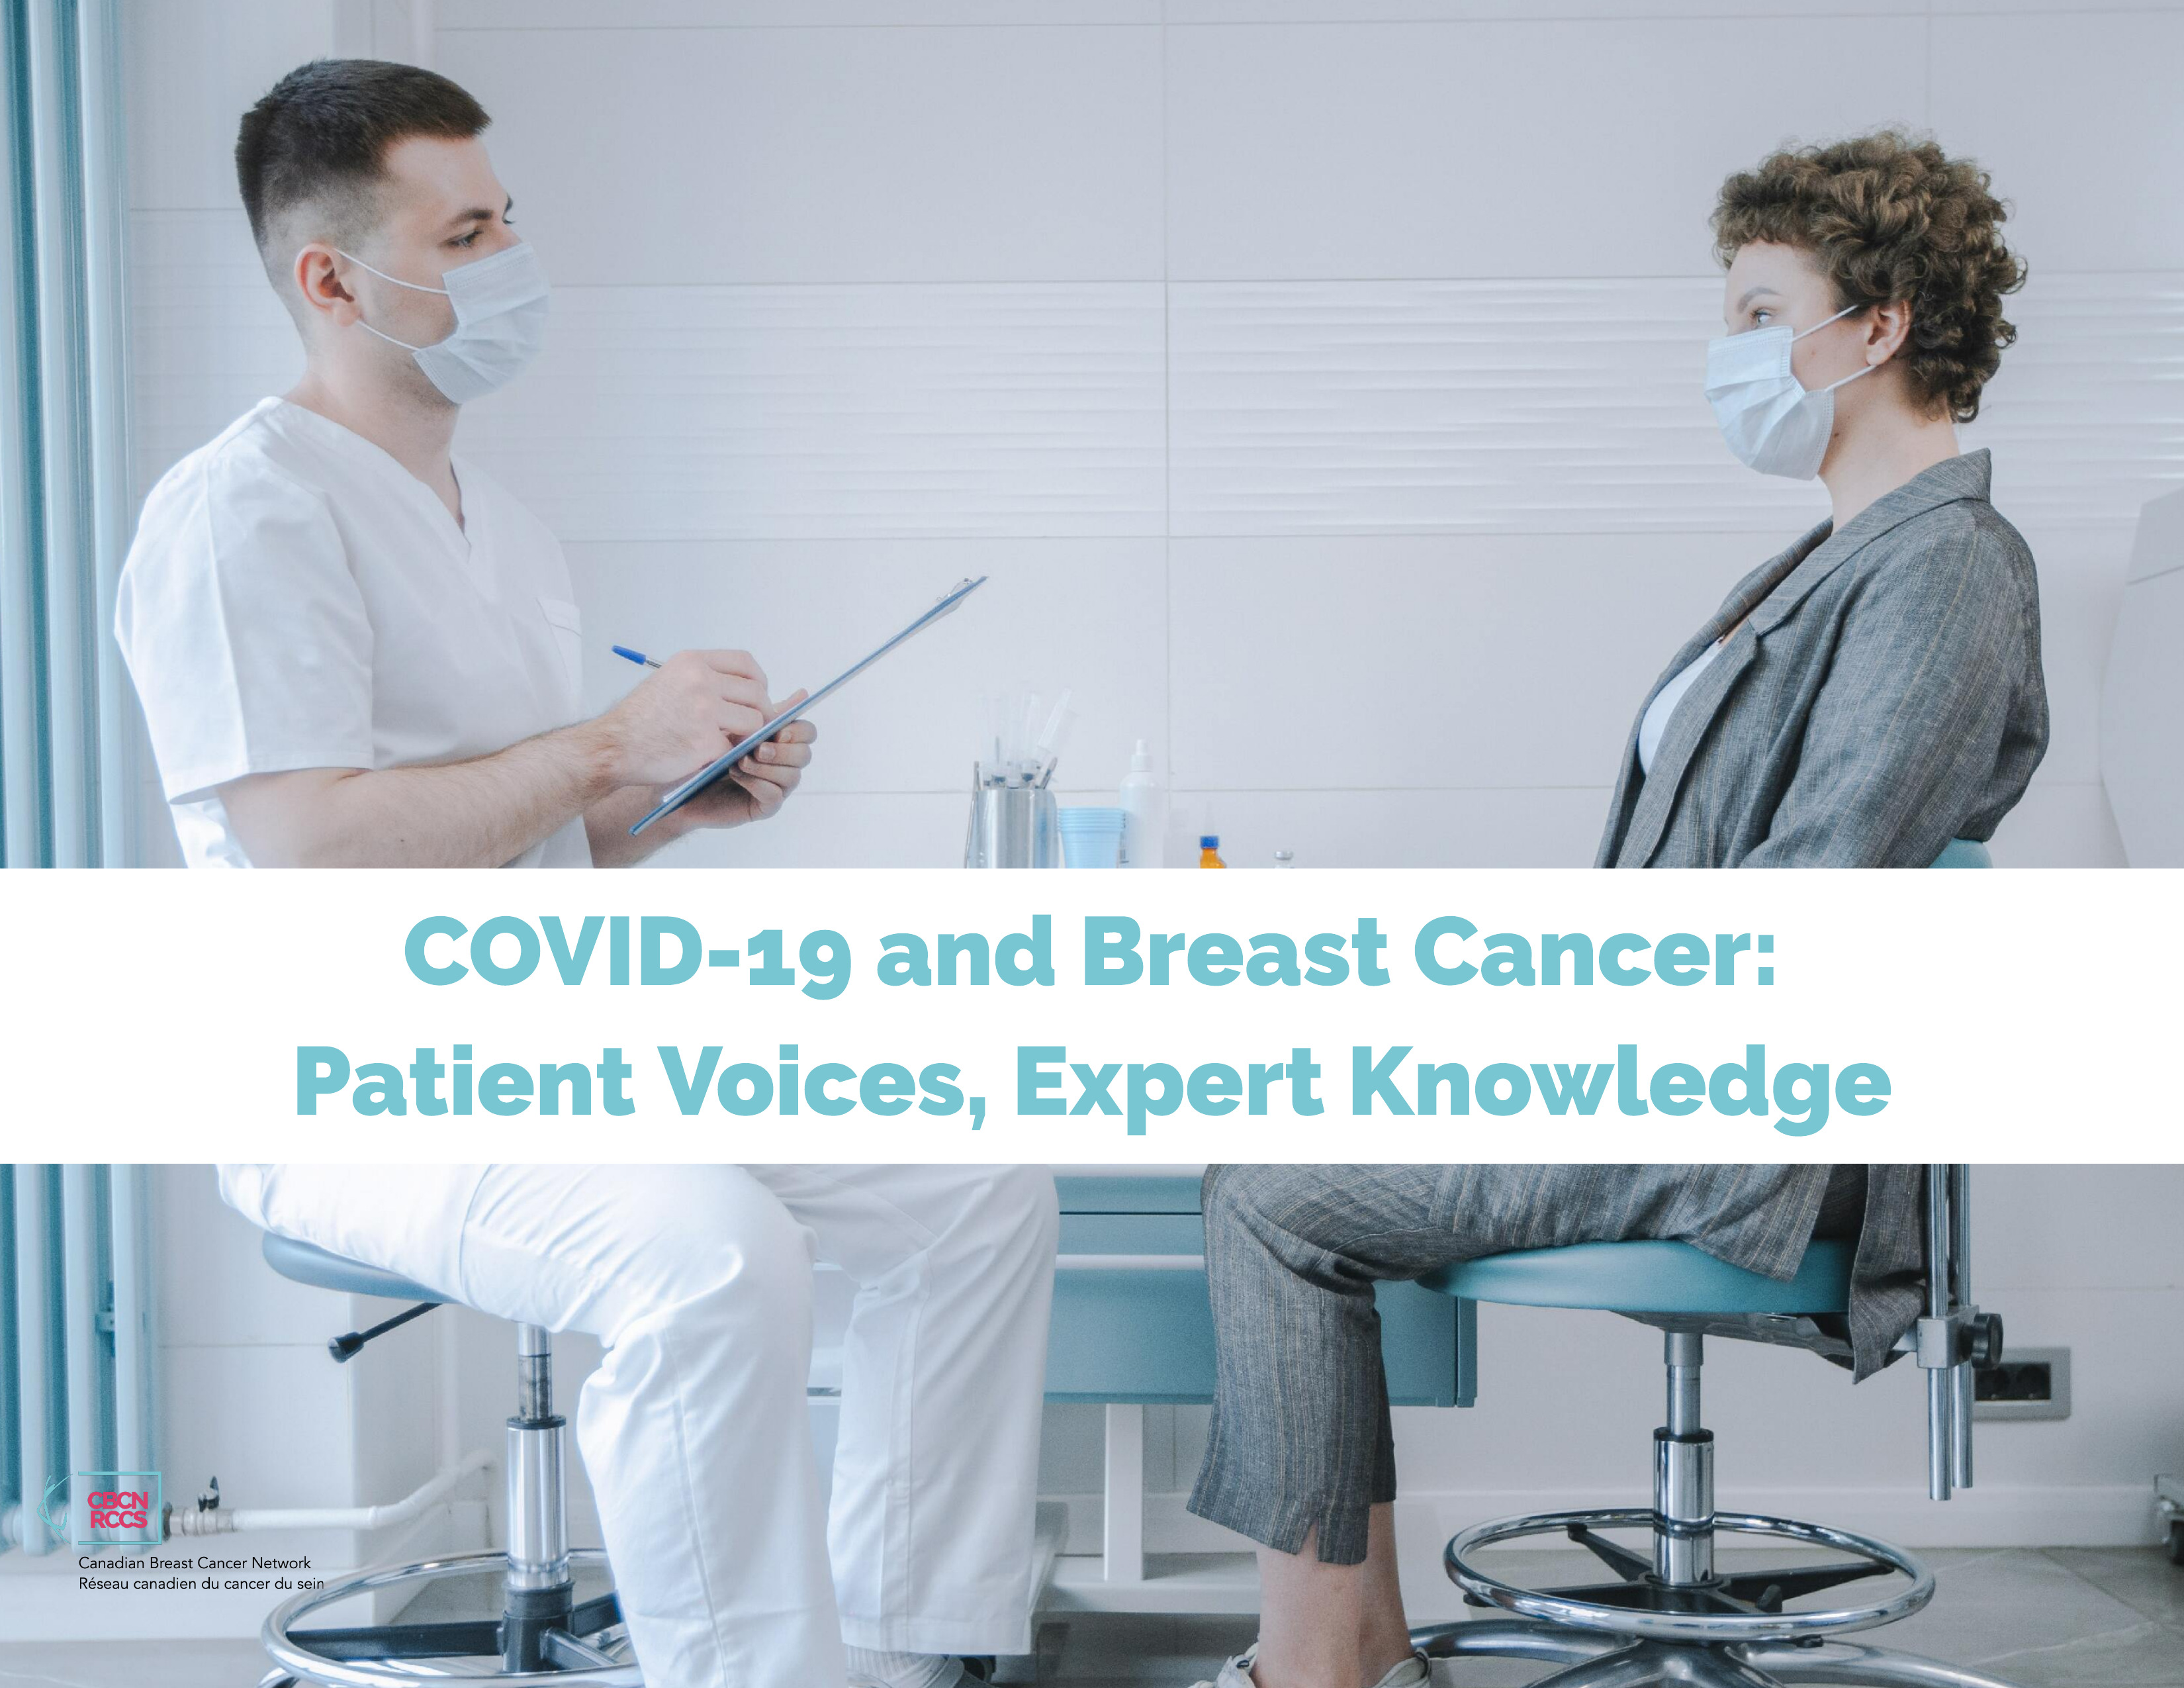 COVID-19 and Breast Cancer: Patient Voices, Expert Knowledge